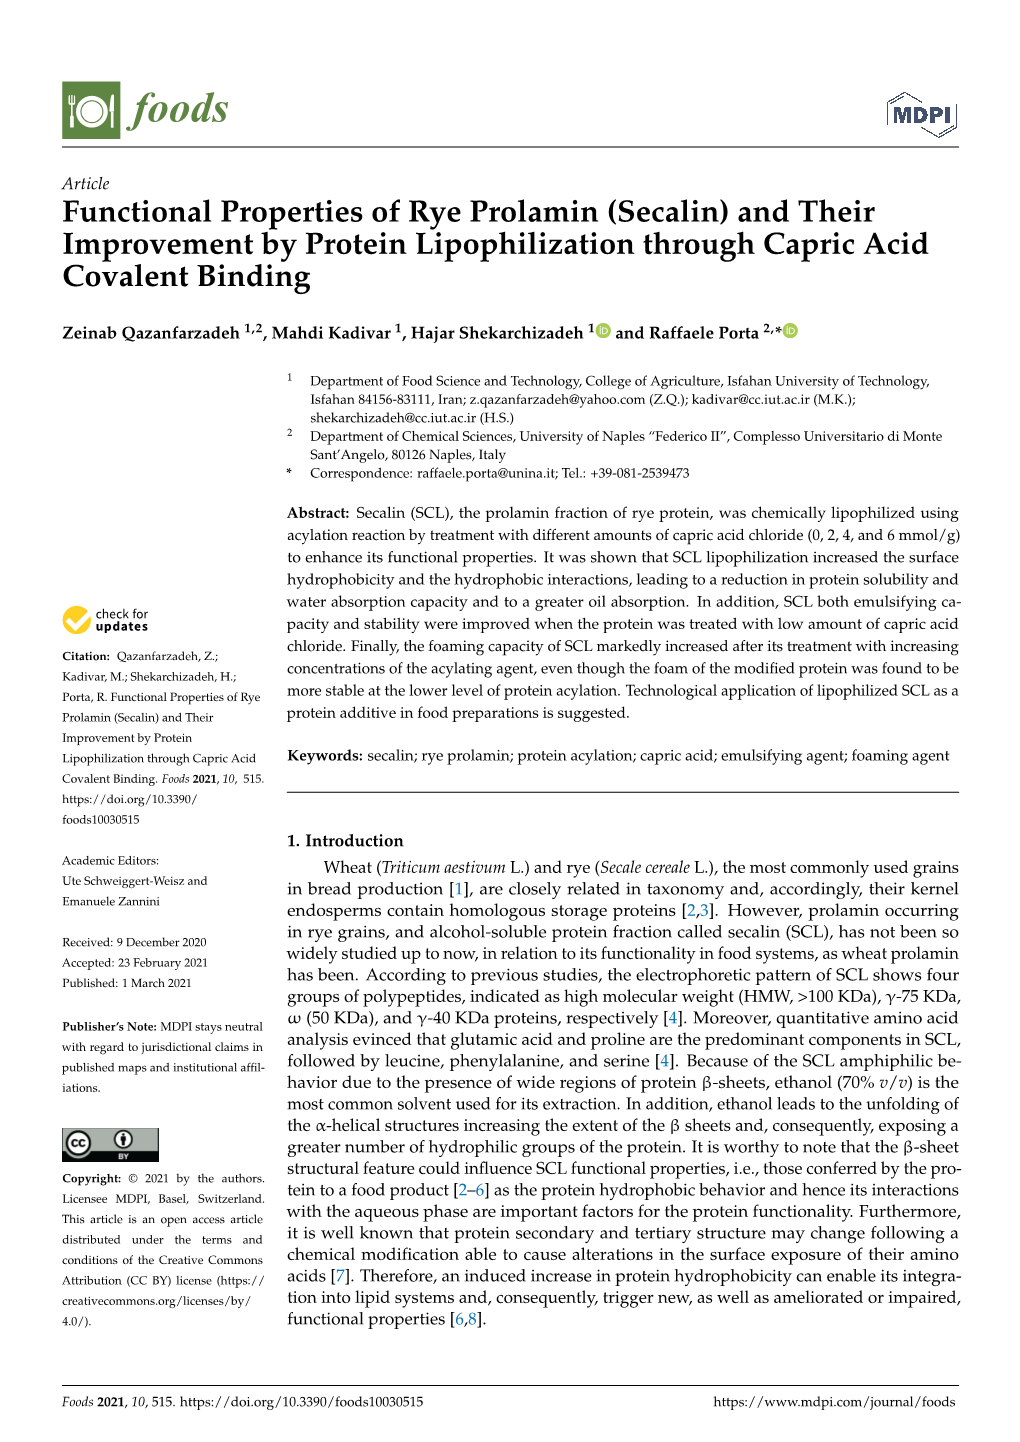 Functional Properties of Rye Prolamin (Secalin) and Their Improvement by Protein Lipophilization Through Capric Acid Covalent Binding